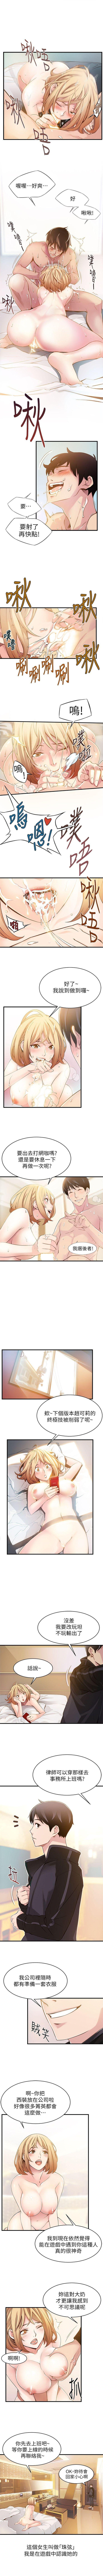 Live 弱點 1-101 官方中文（連載中） Shower - Page 3